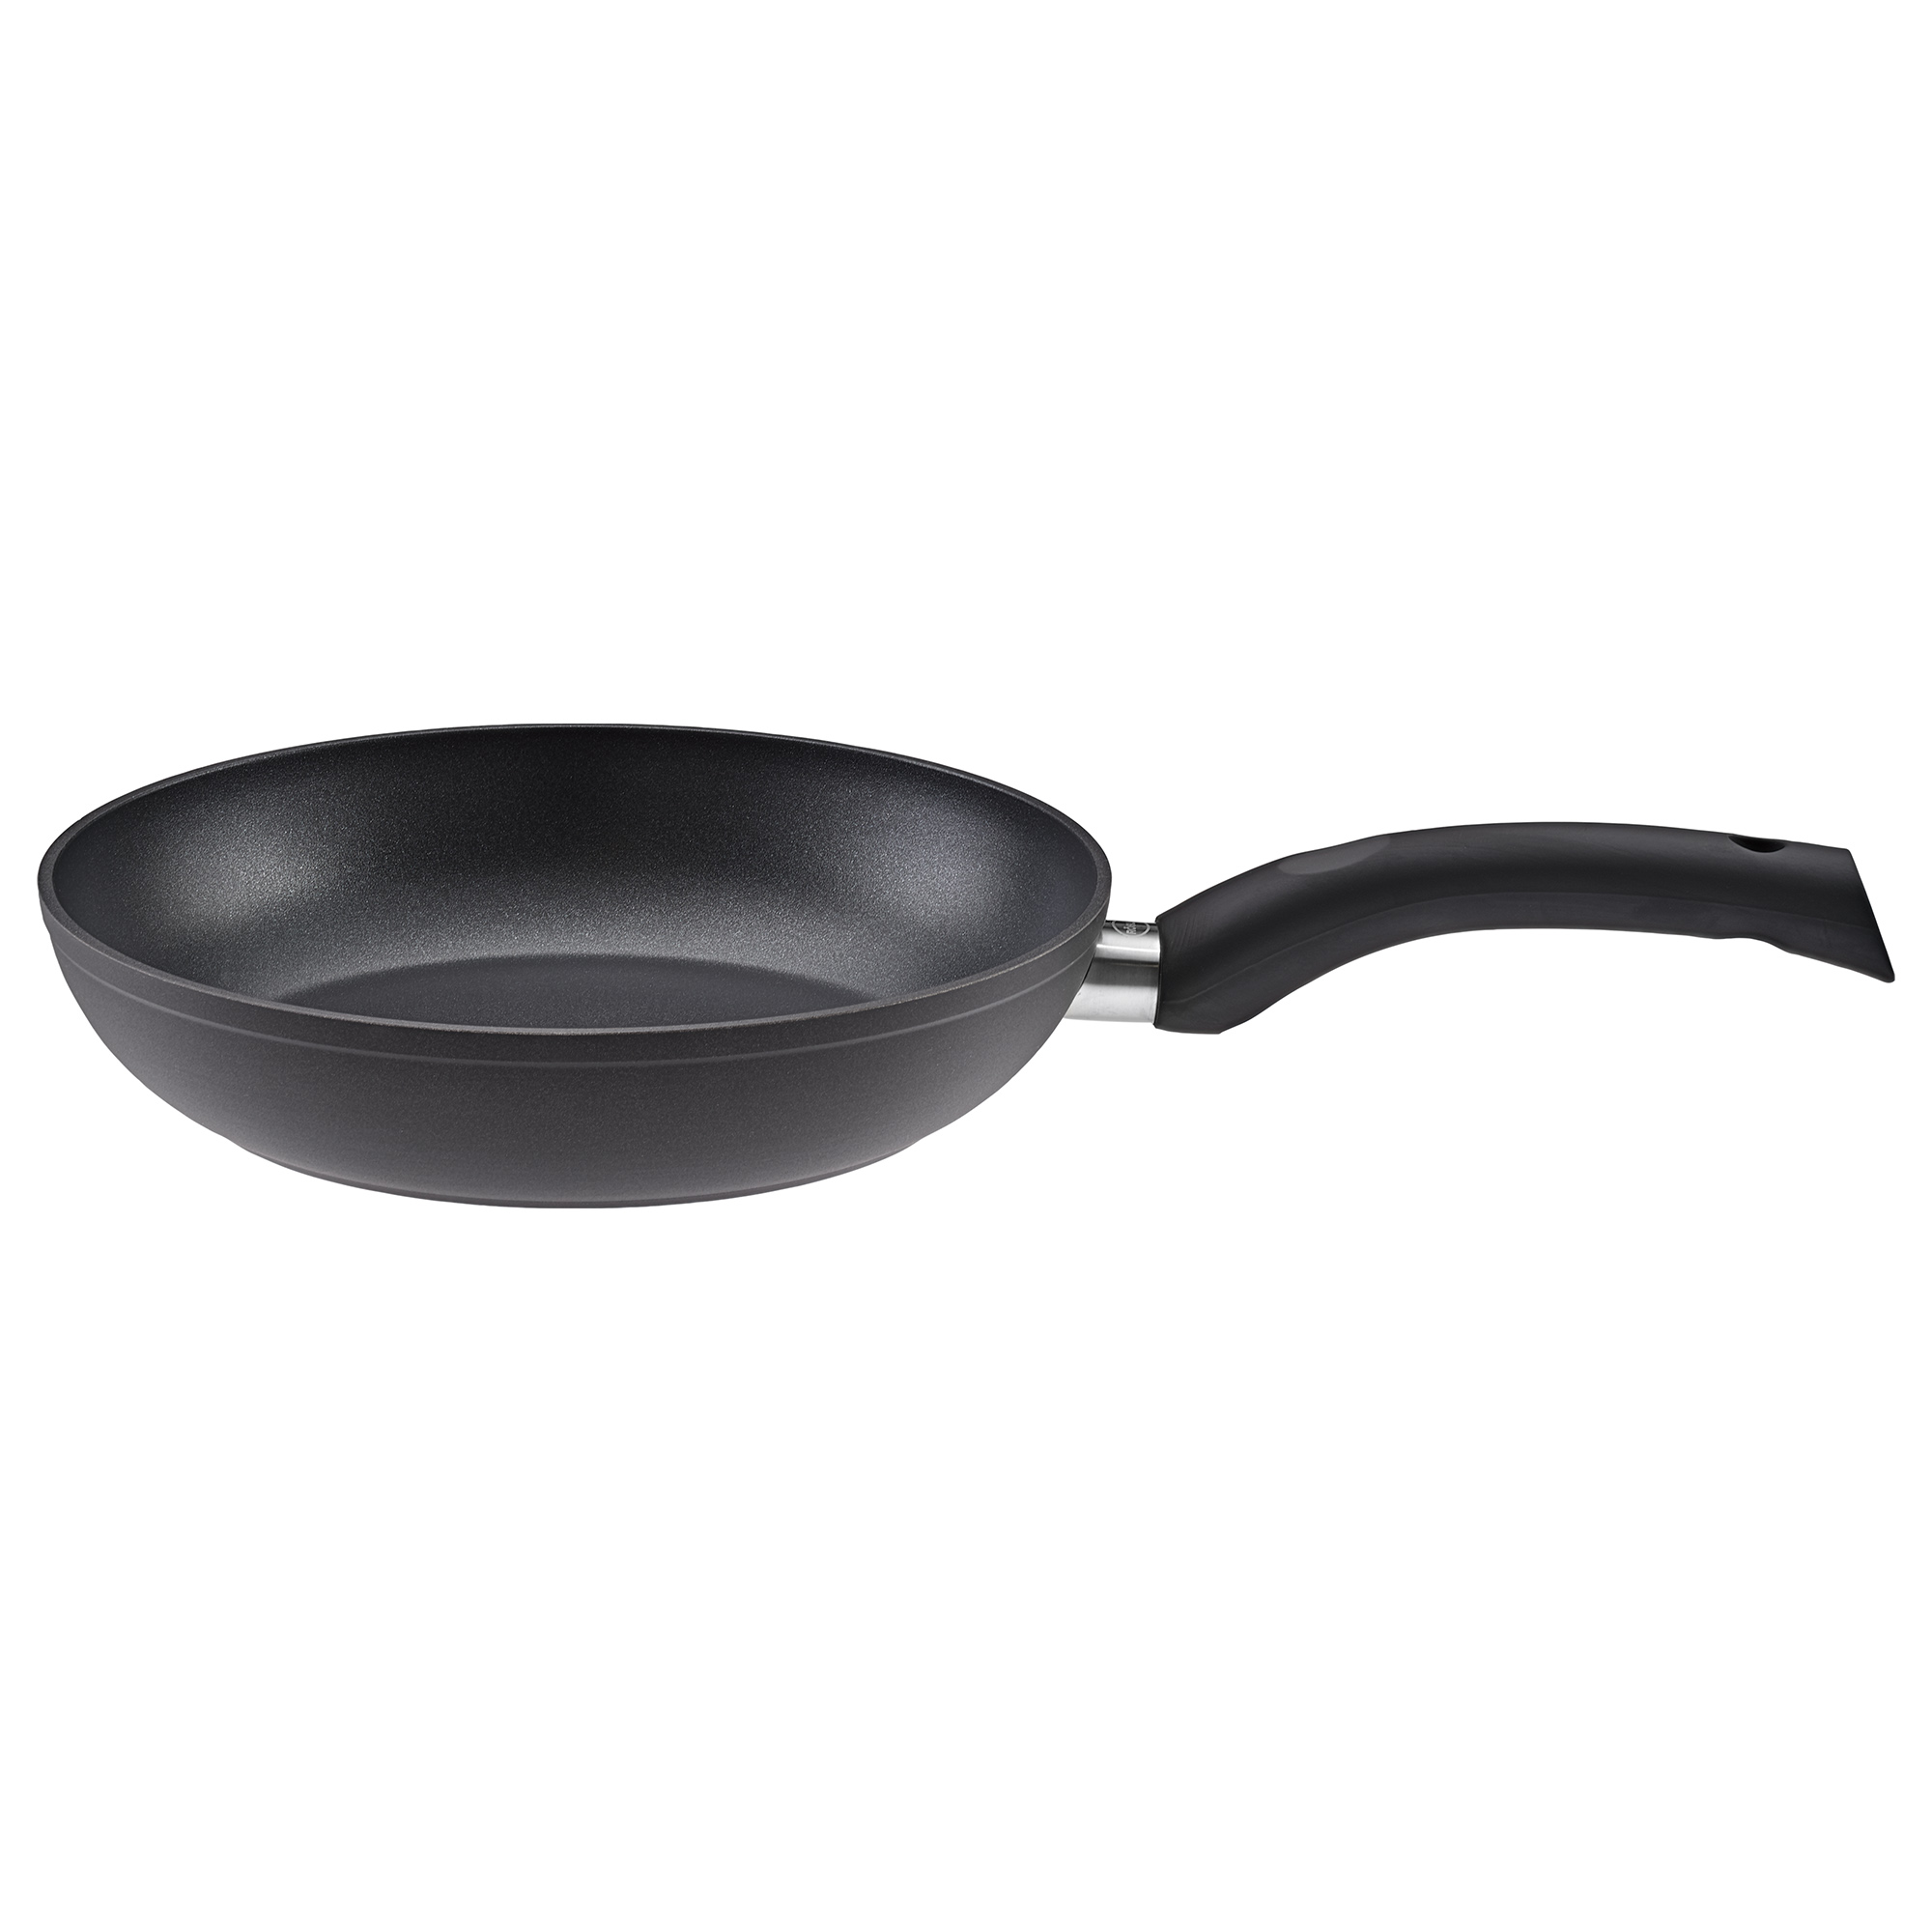 Frying pan "Moments" Ø 28 cm with non-stick coating ProPlex